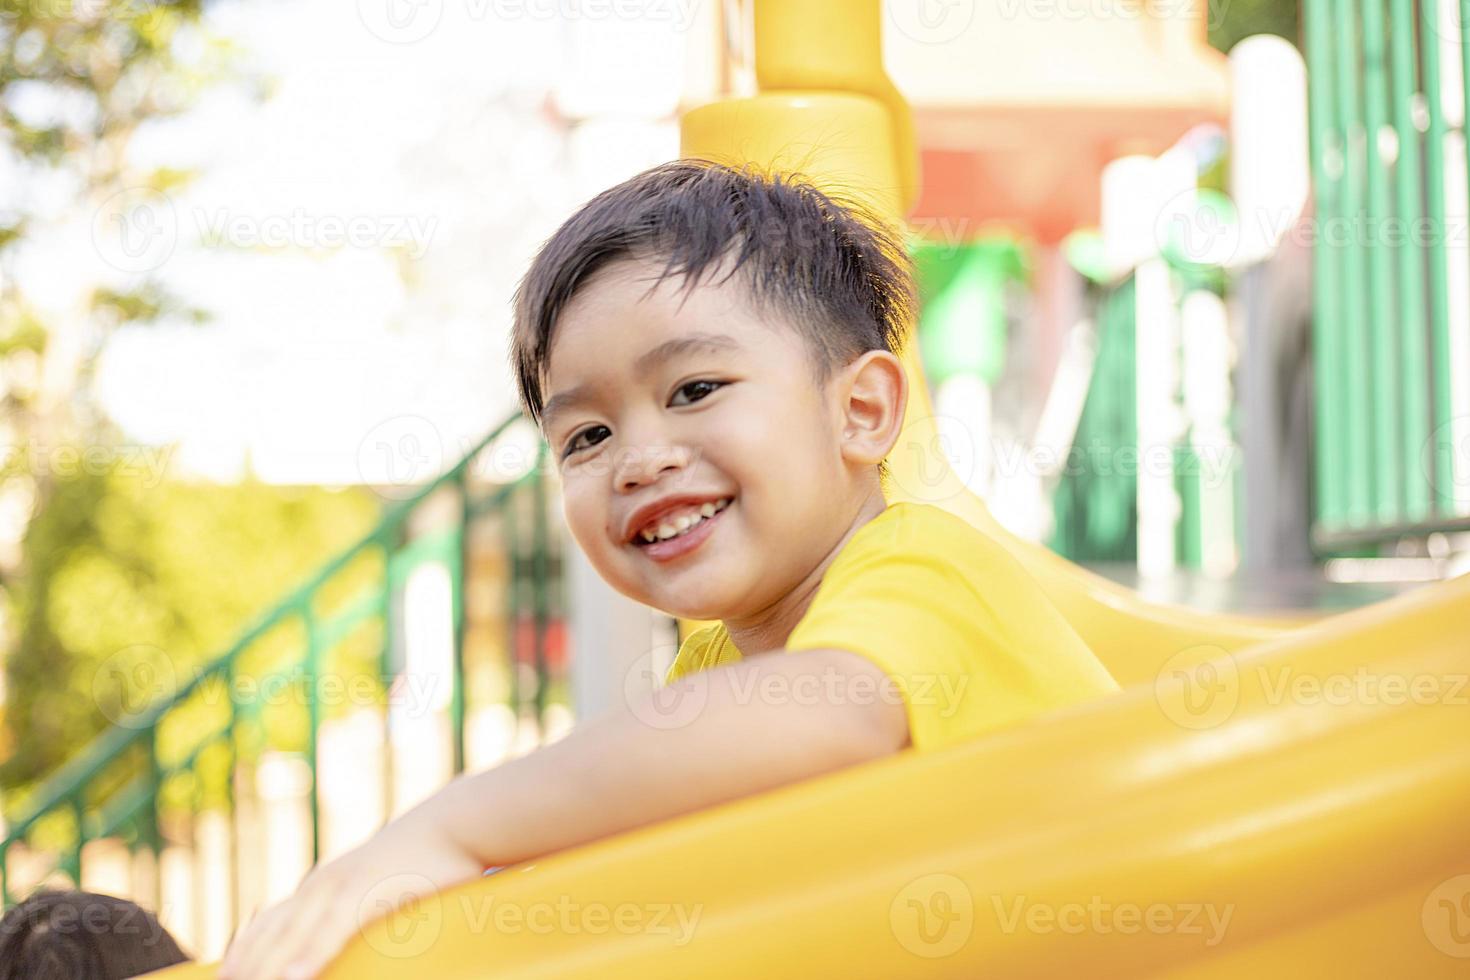 Child playing on the outdoor playground. Kids play in school or kindergarten yard. Active kid on colorful slide and swing. Healthy summer activity for children. photo